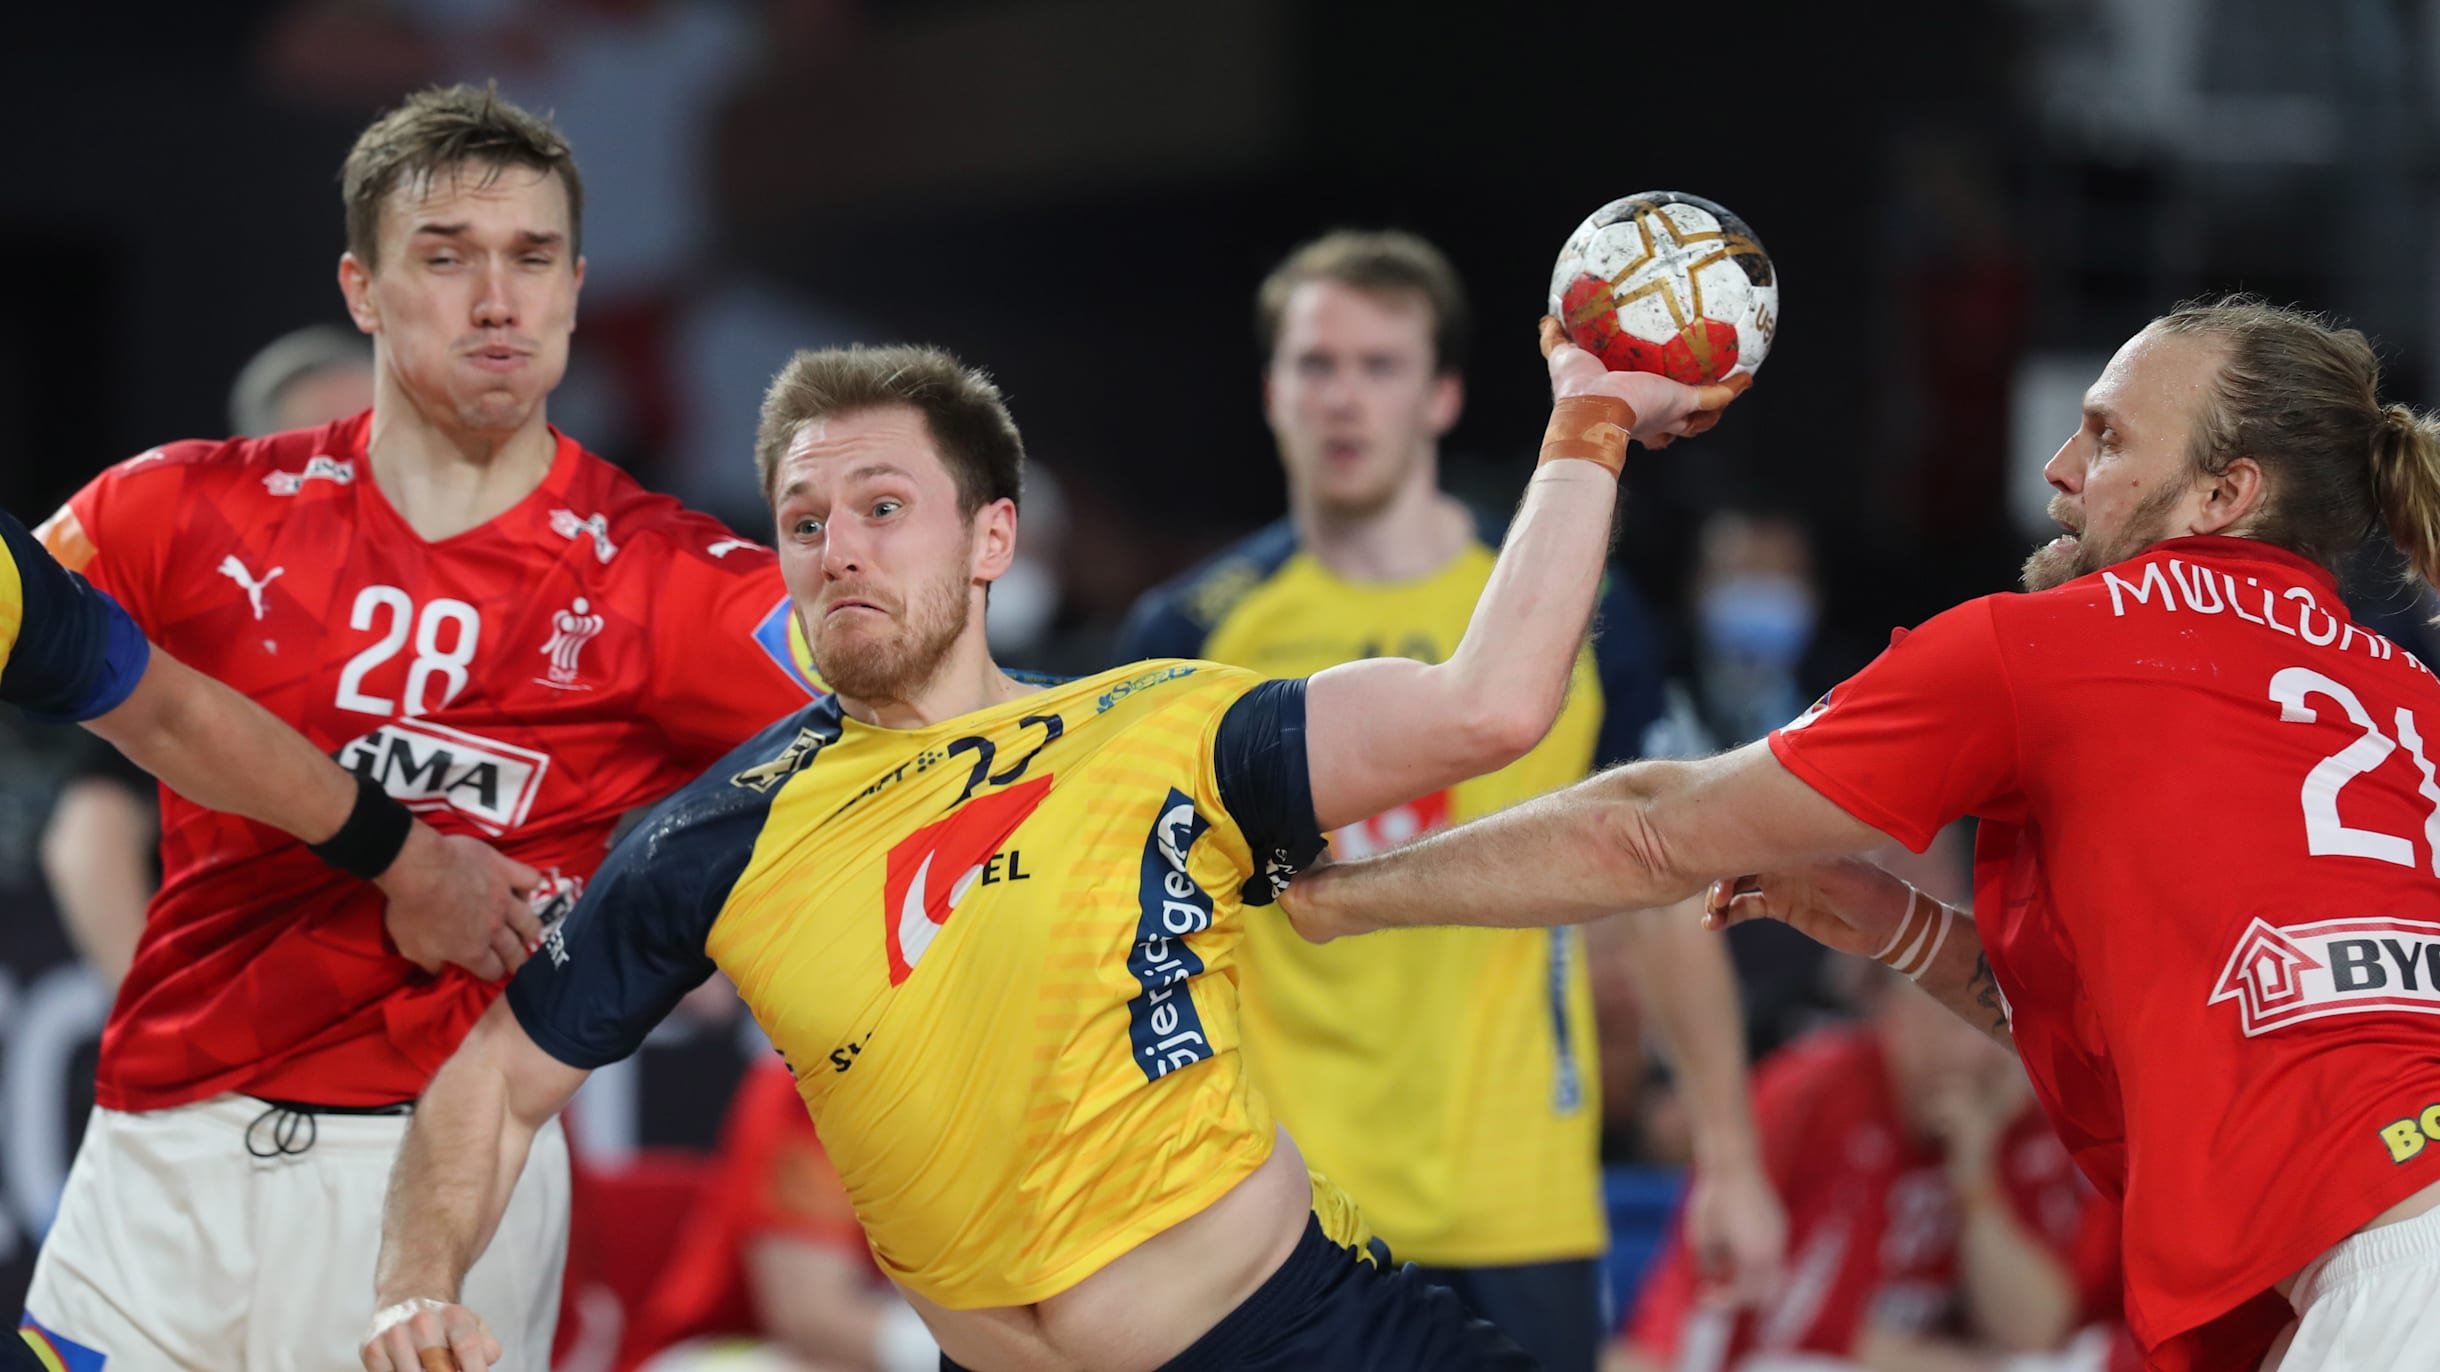 World Handball Championship 2023: Why two matches in the same time?